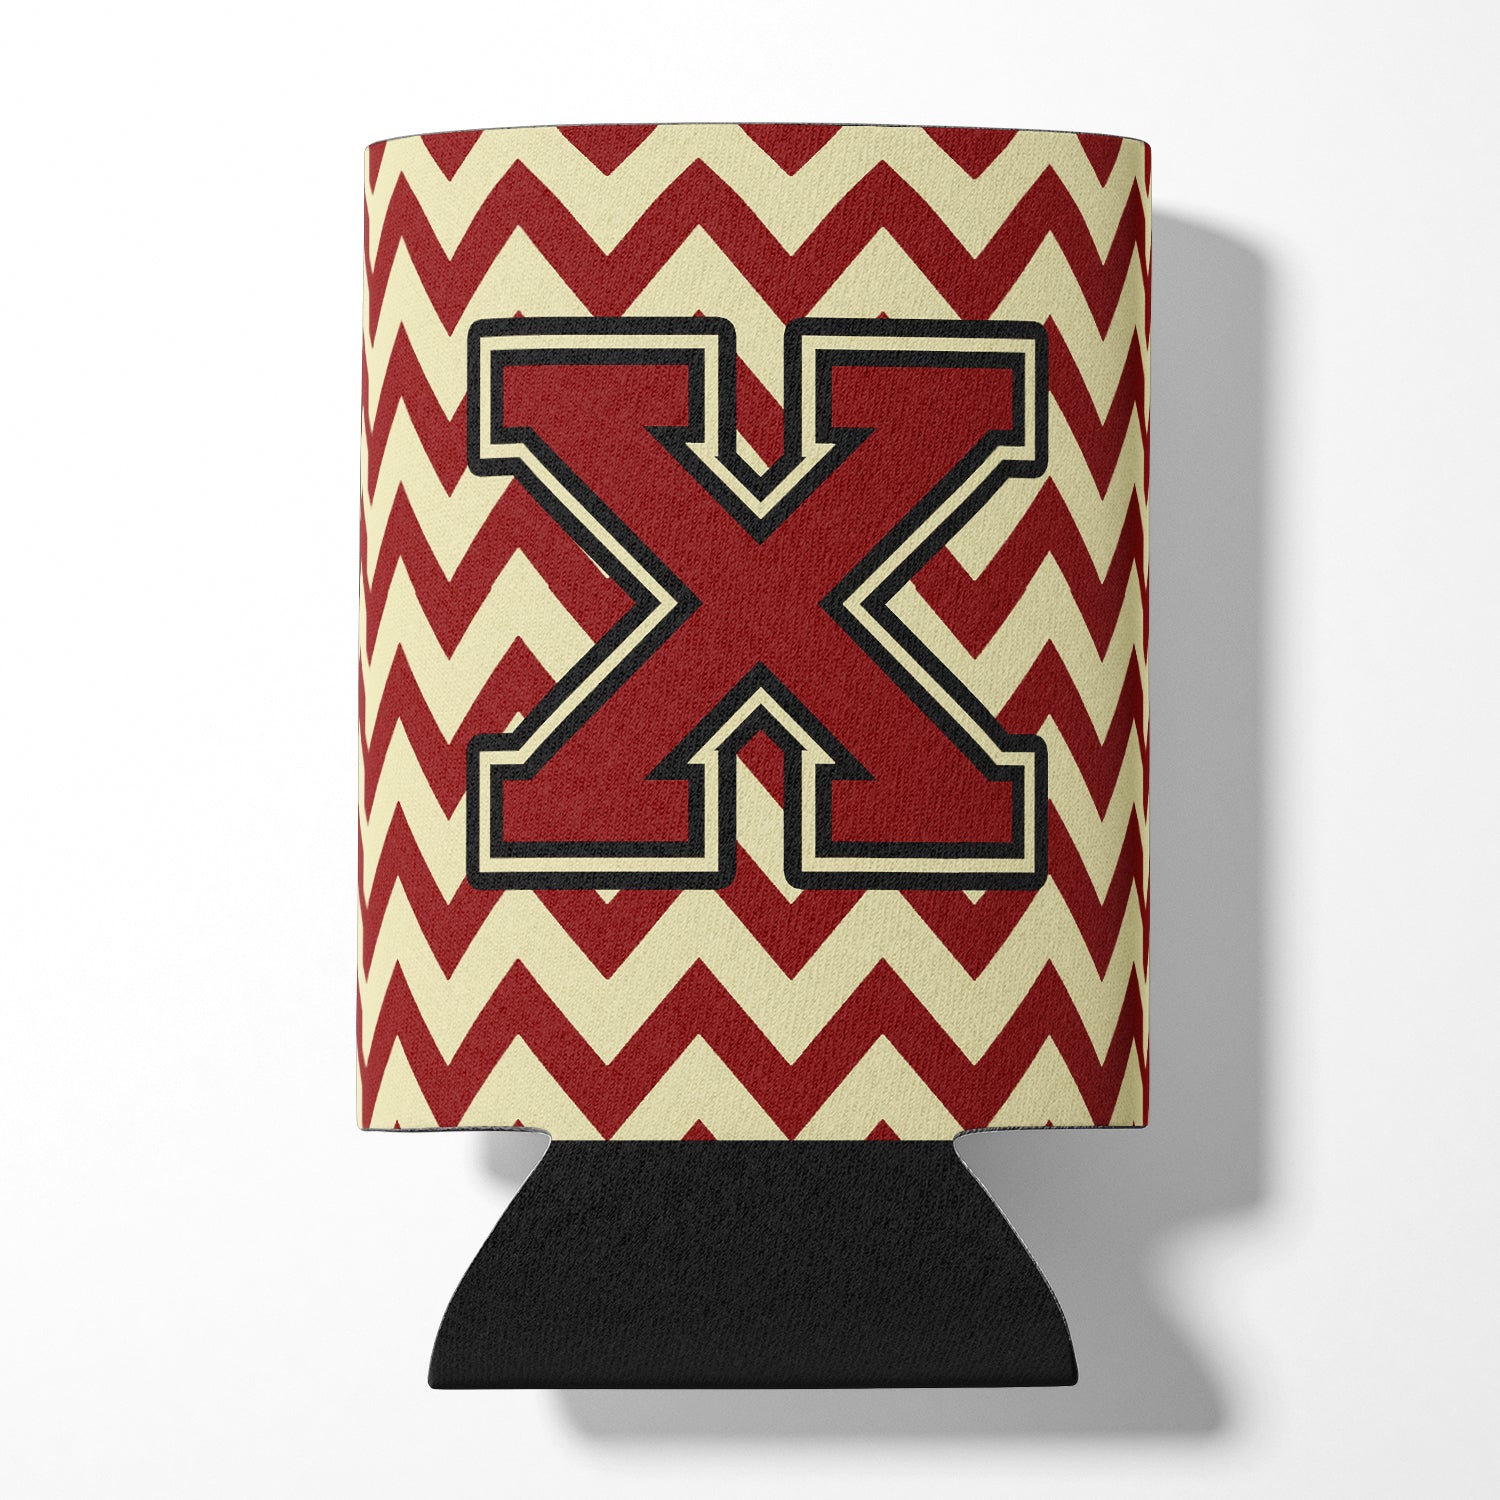 Letter X Chevron Maroon and Gold Can or Bottle Hugger CJ1061-XCC.